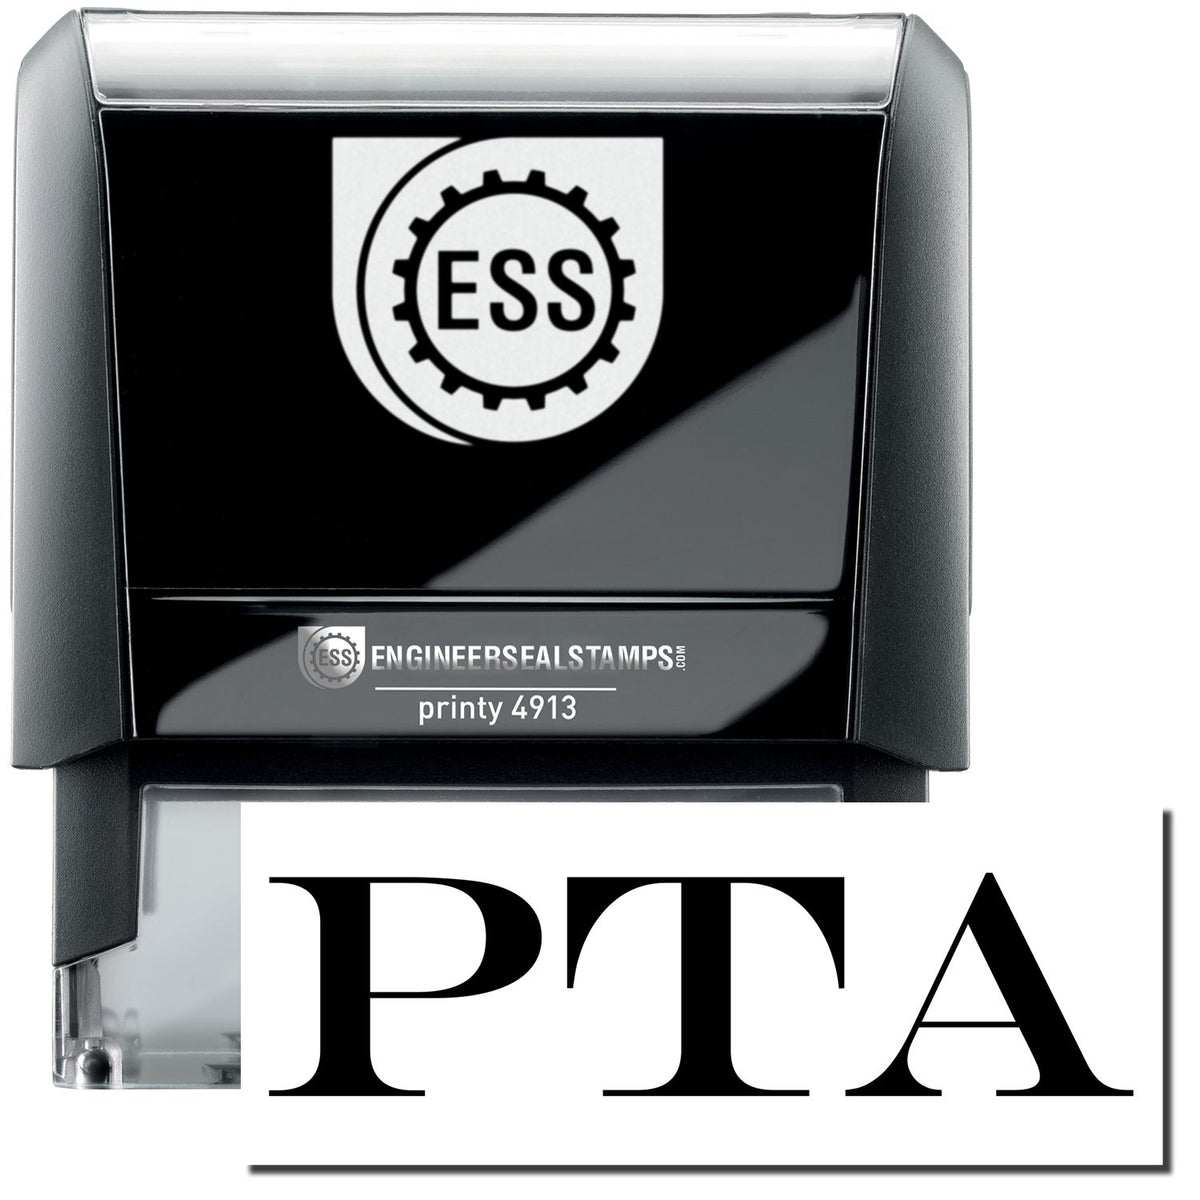 A self-inking stamp with a stamped image showing how the text &quot;PTA&quot; in a large bold font is displayed by it.